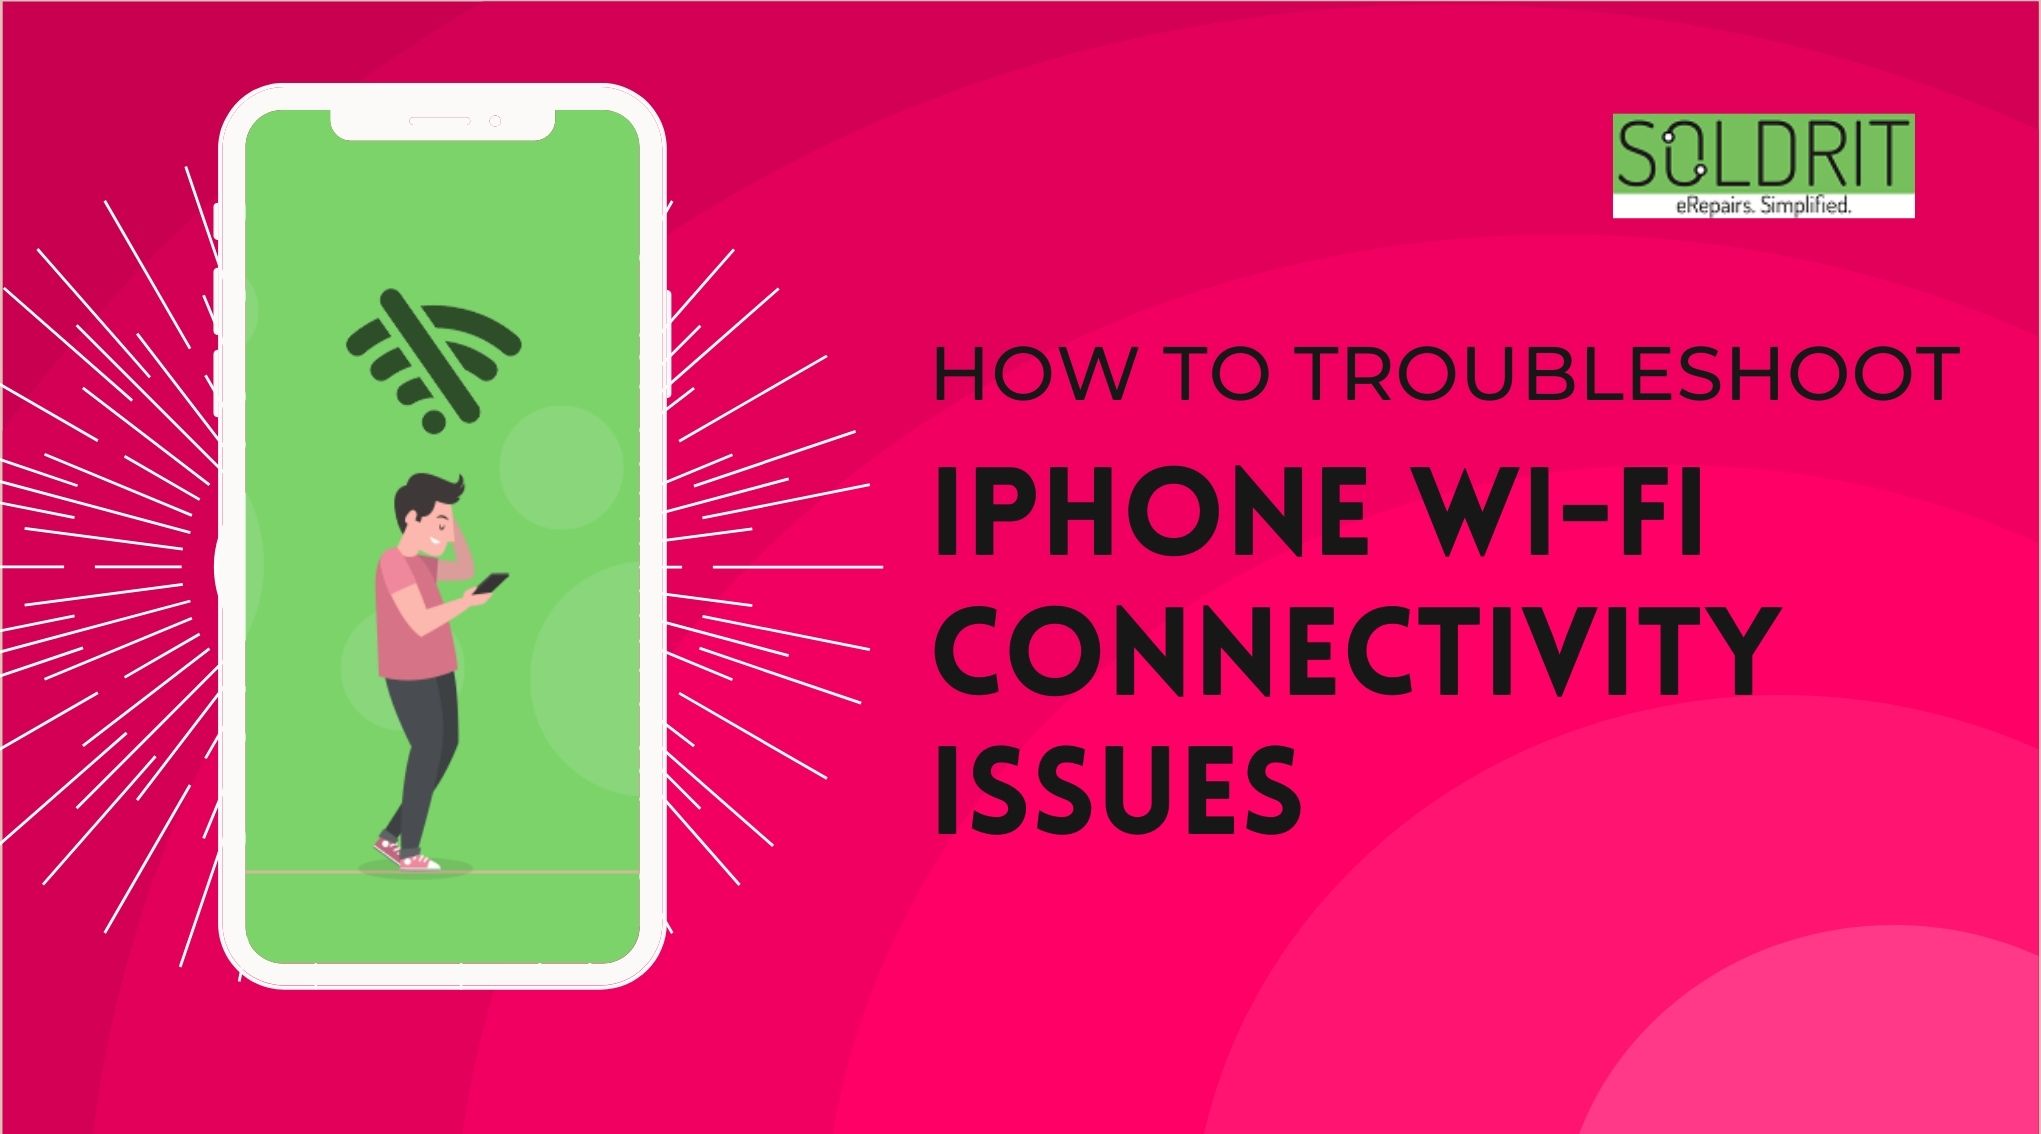 How to Troubleshoot iPhone Wi-Fi Connectivity Issues